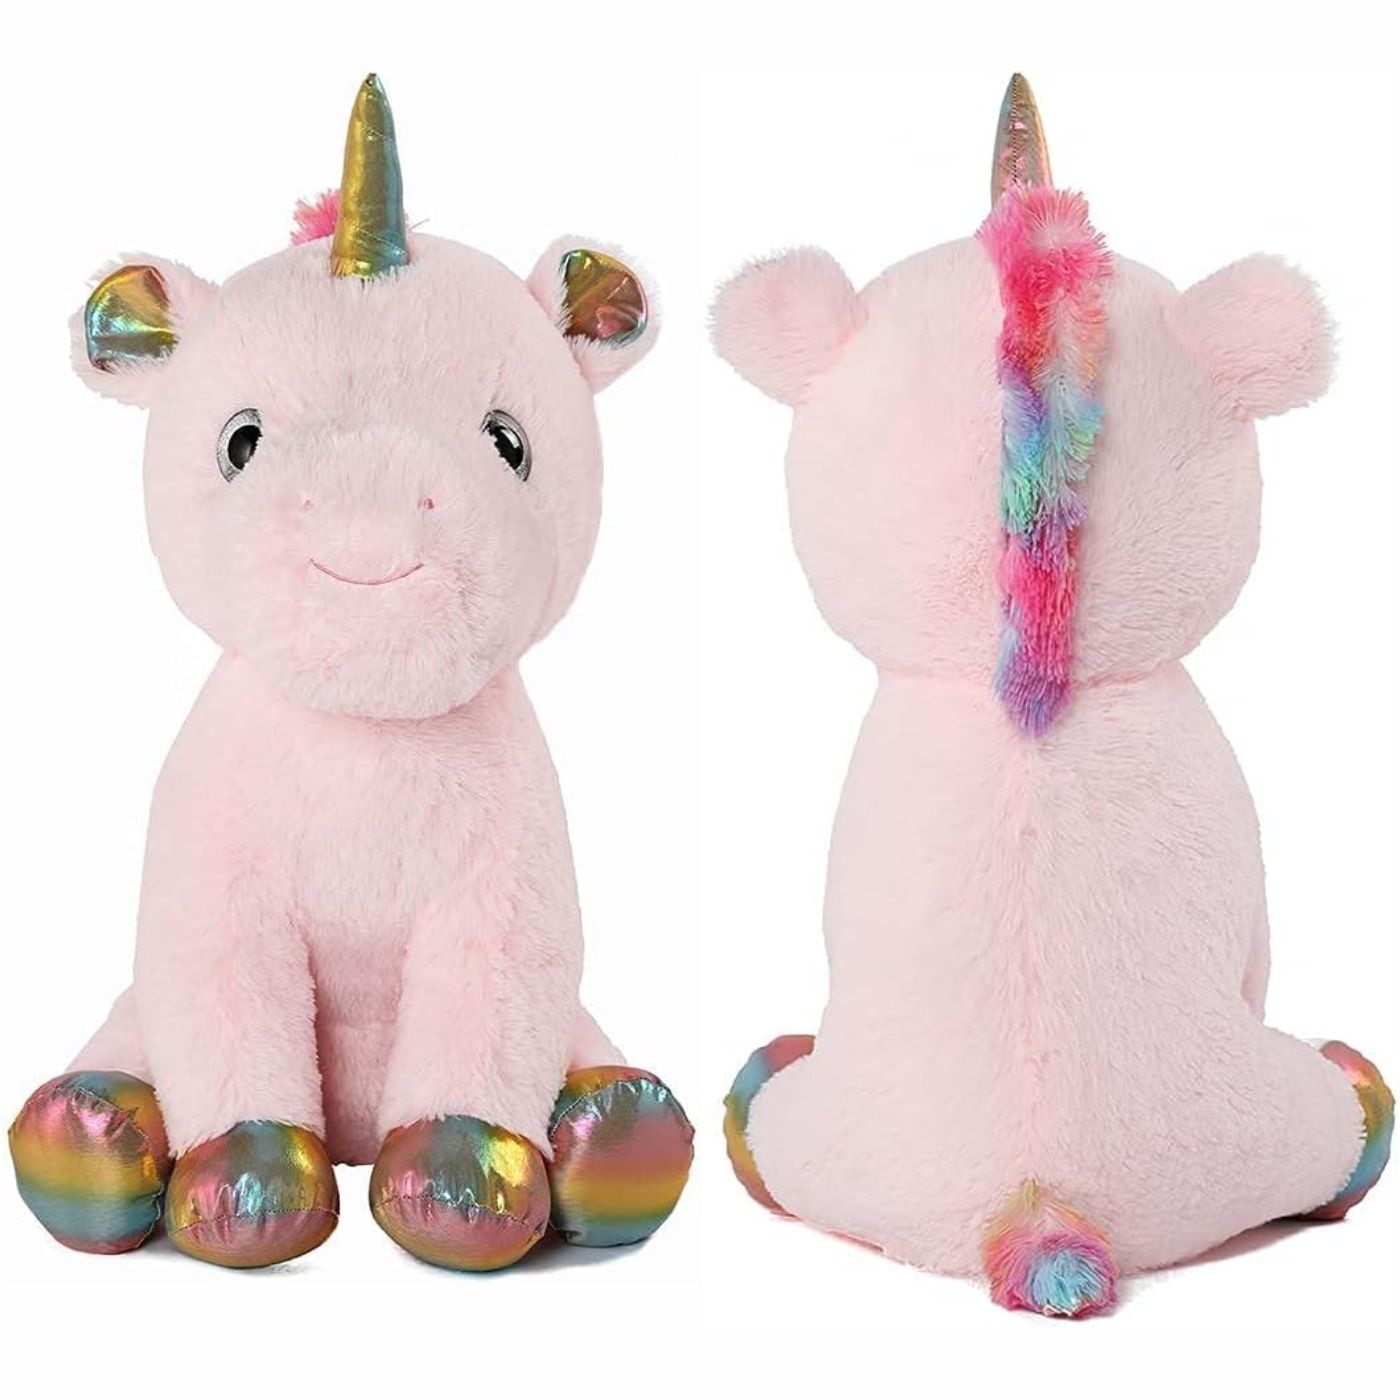 Giant Unicorn Stuffed Toy, Pink, 24 Inches